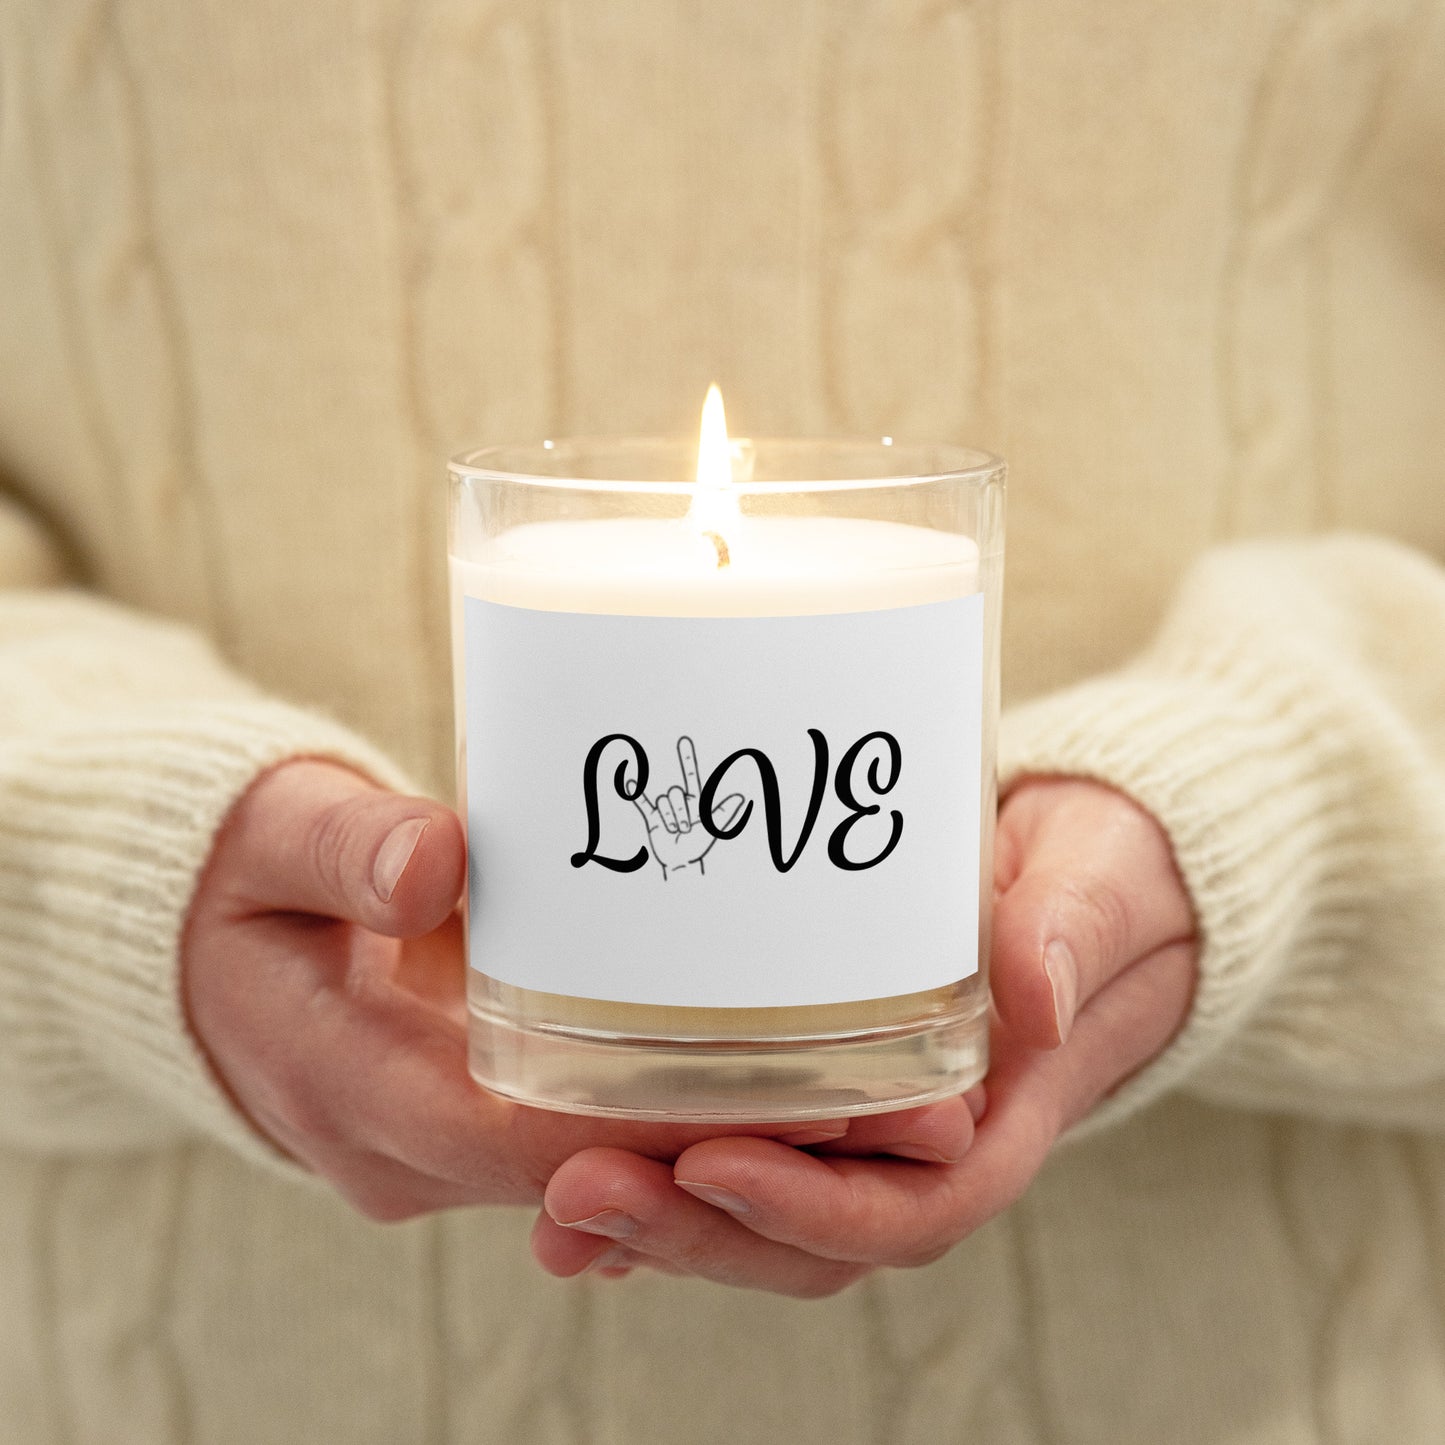 Love American Sign Language jar soy wax candle